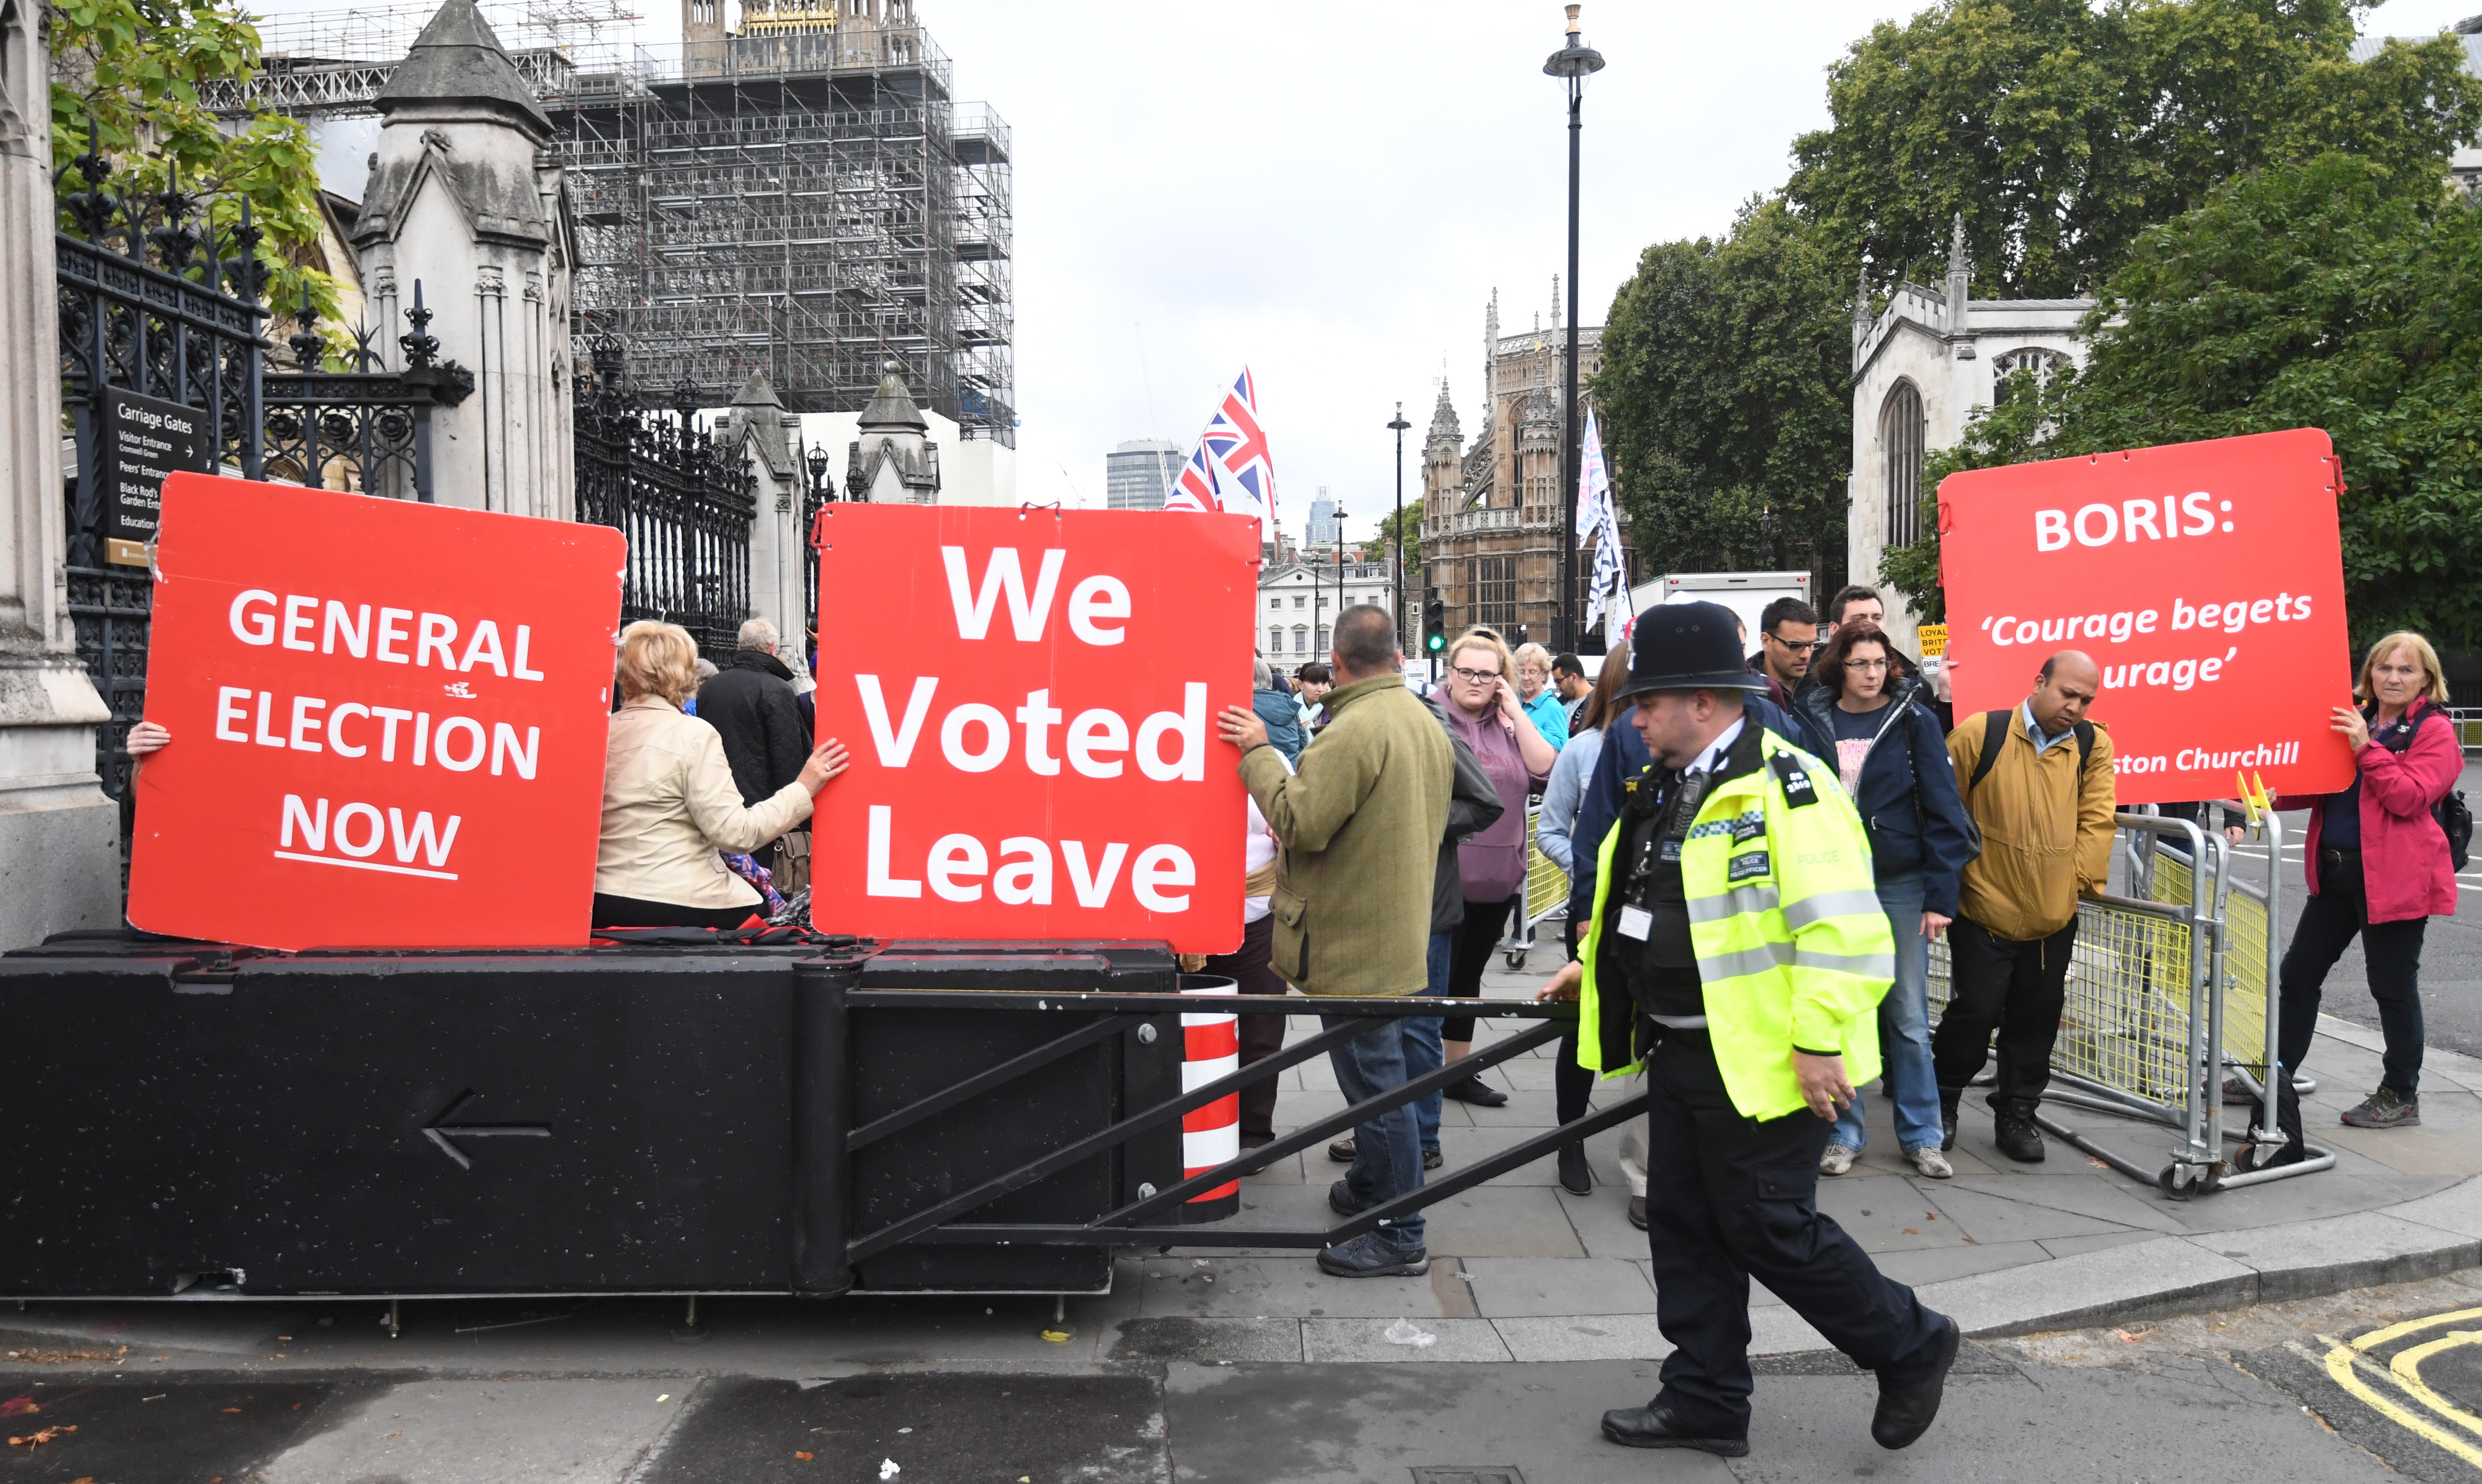 epa07830229 Pro Brexit protesters stand outside the Houses of Parliament in London, Britain, 09 September 2019. Britain's Prime Minister Boris Johnson will put forward a vote in Parliament later in the day where Members of Parliament will be asked to vote for an early snap election. Then after Parliamentary business on 09 September 2019 the five-week suspension of Parliament will begin and only resume on 14 October 2019.  EPA/FACUNDO ARRIZABALAGA